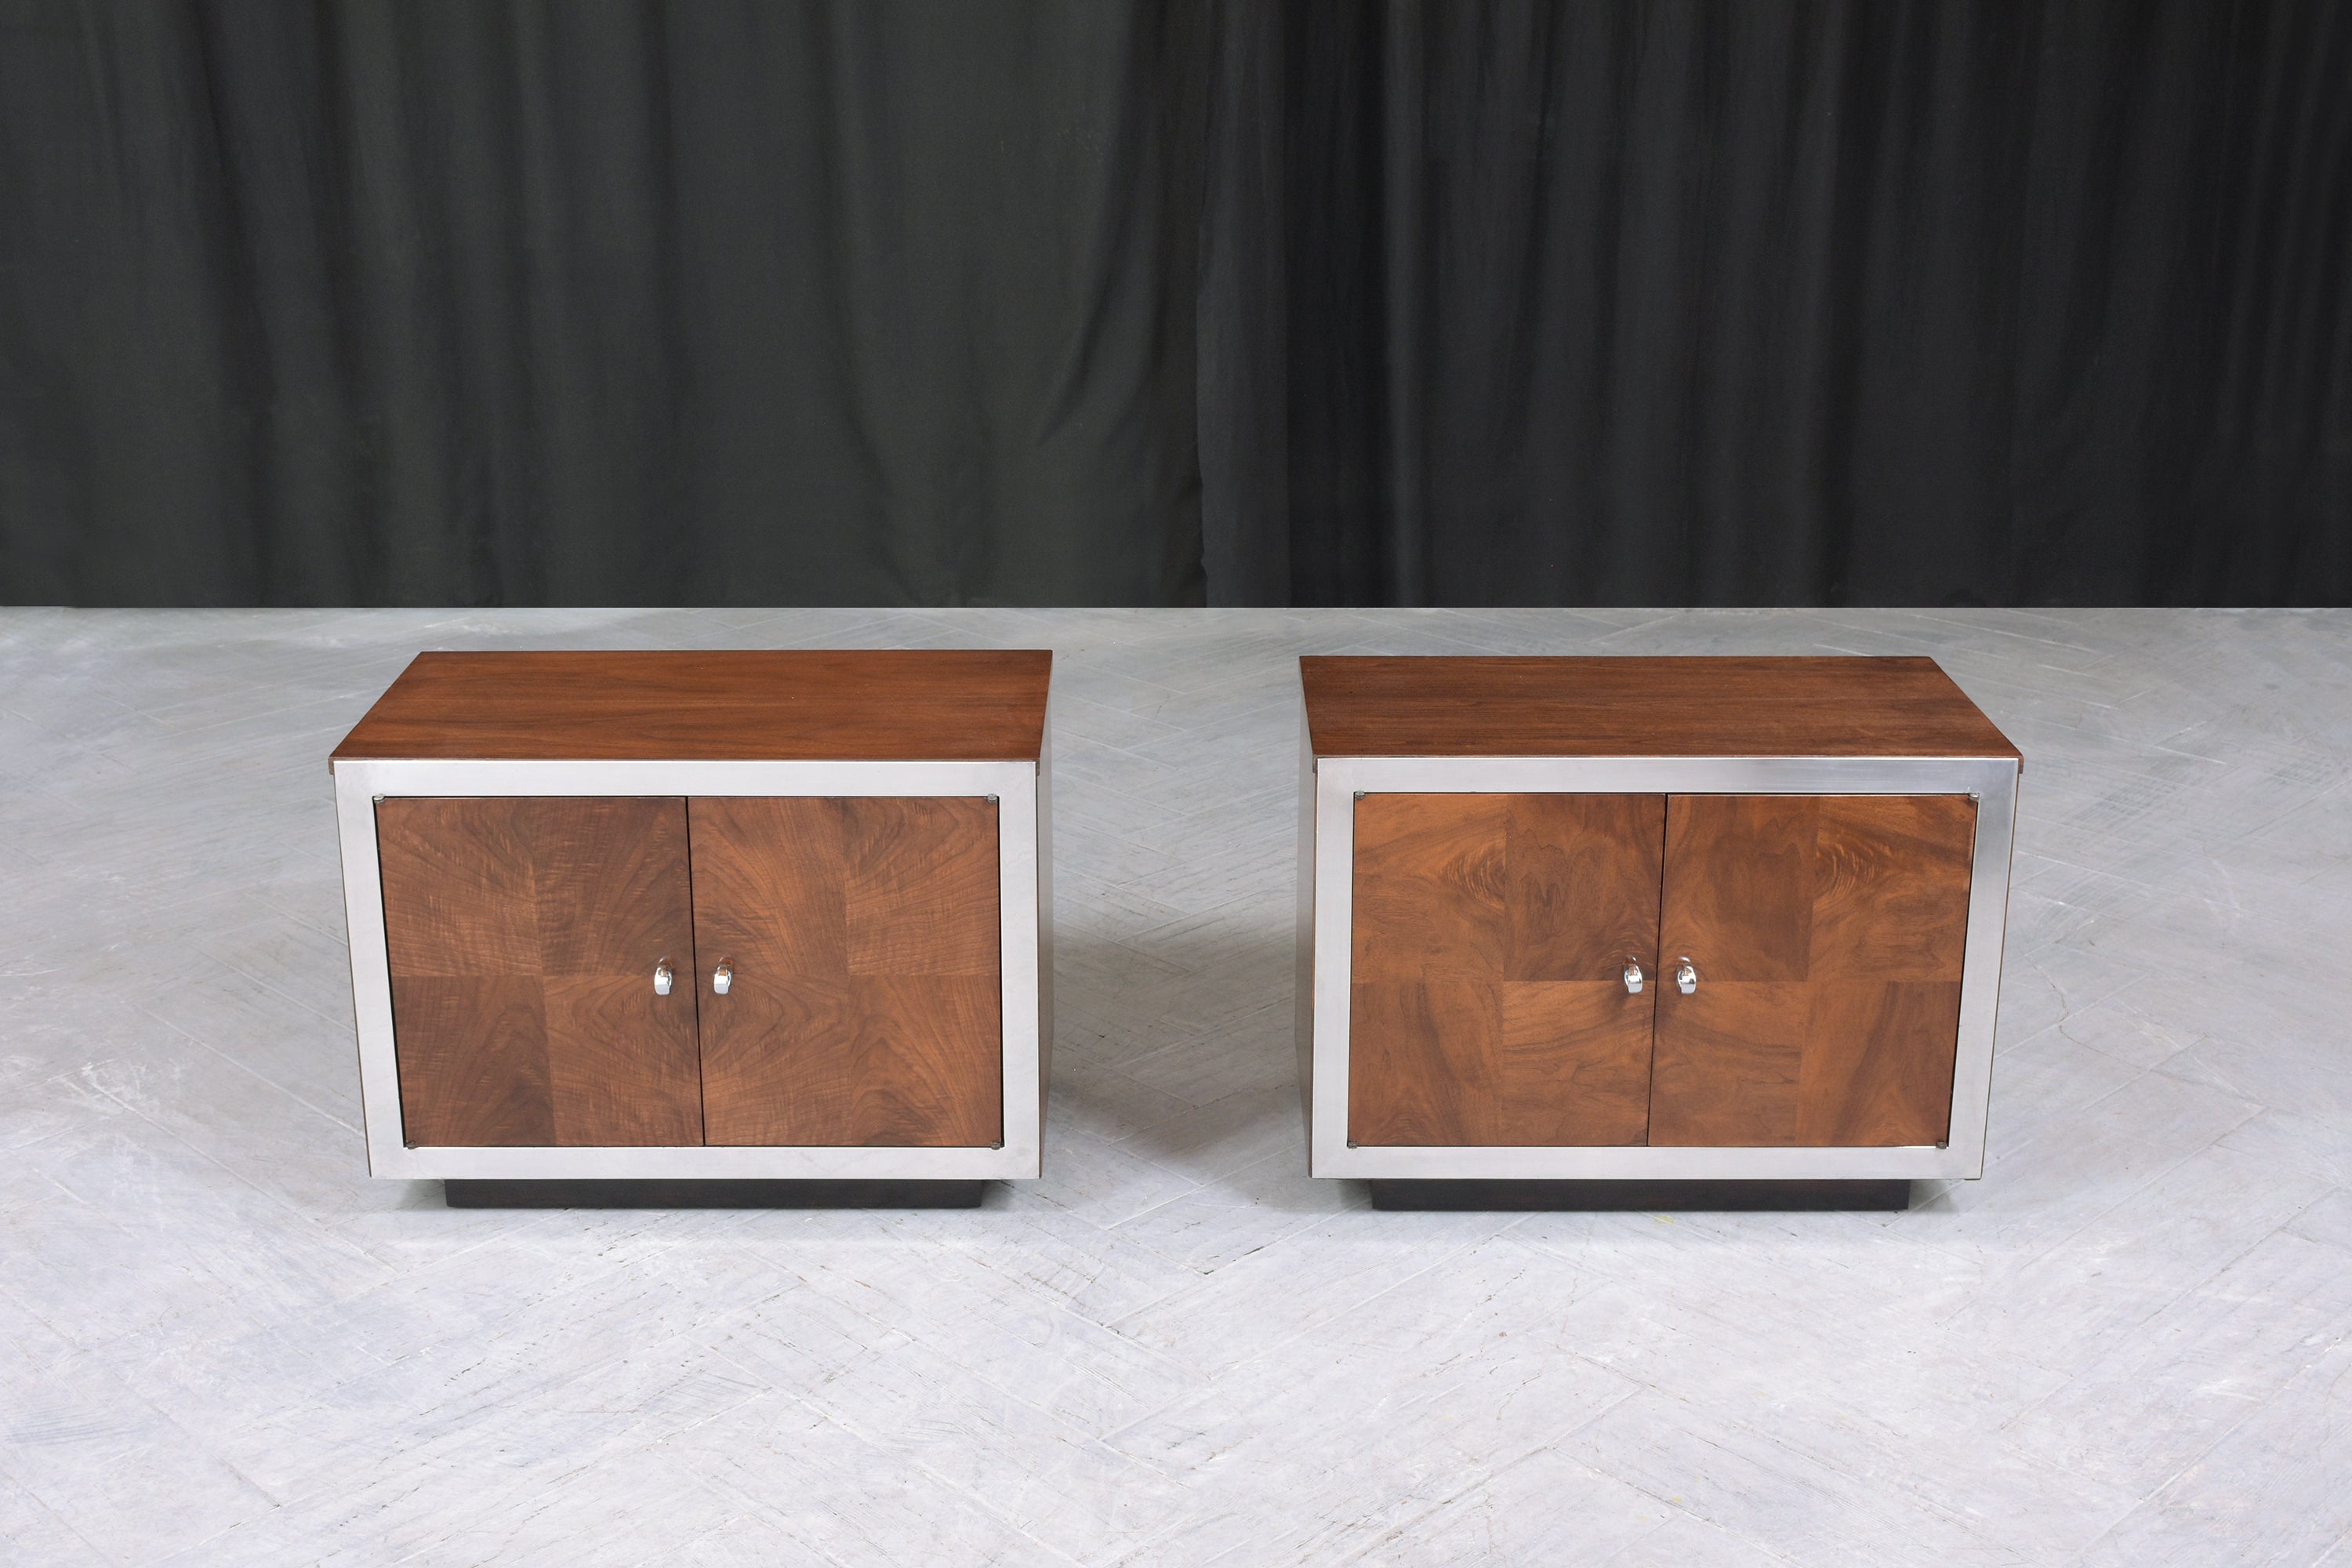 This pair of vintage mid-century modern walnut nightstands are in great condition handcrafted out of solid wood with exotic walnut veneers and have been completely restored by our professional expert craftsmen team. This sleek design pair of 1960s